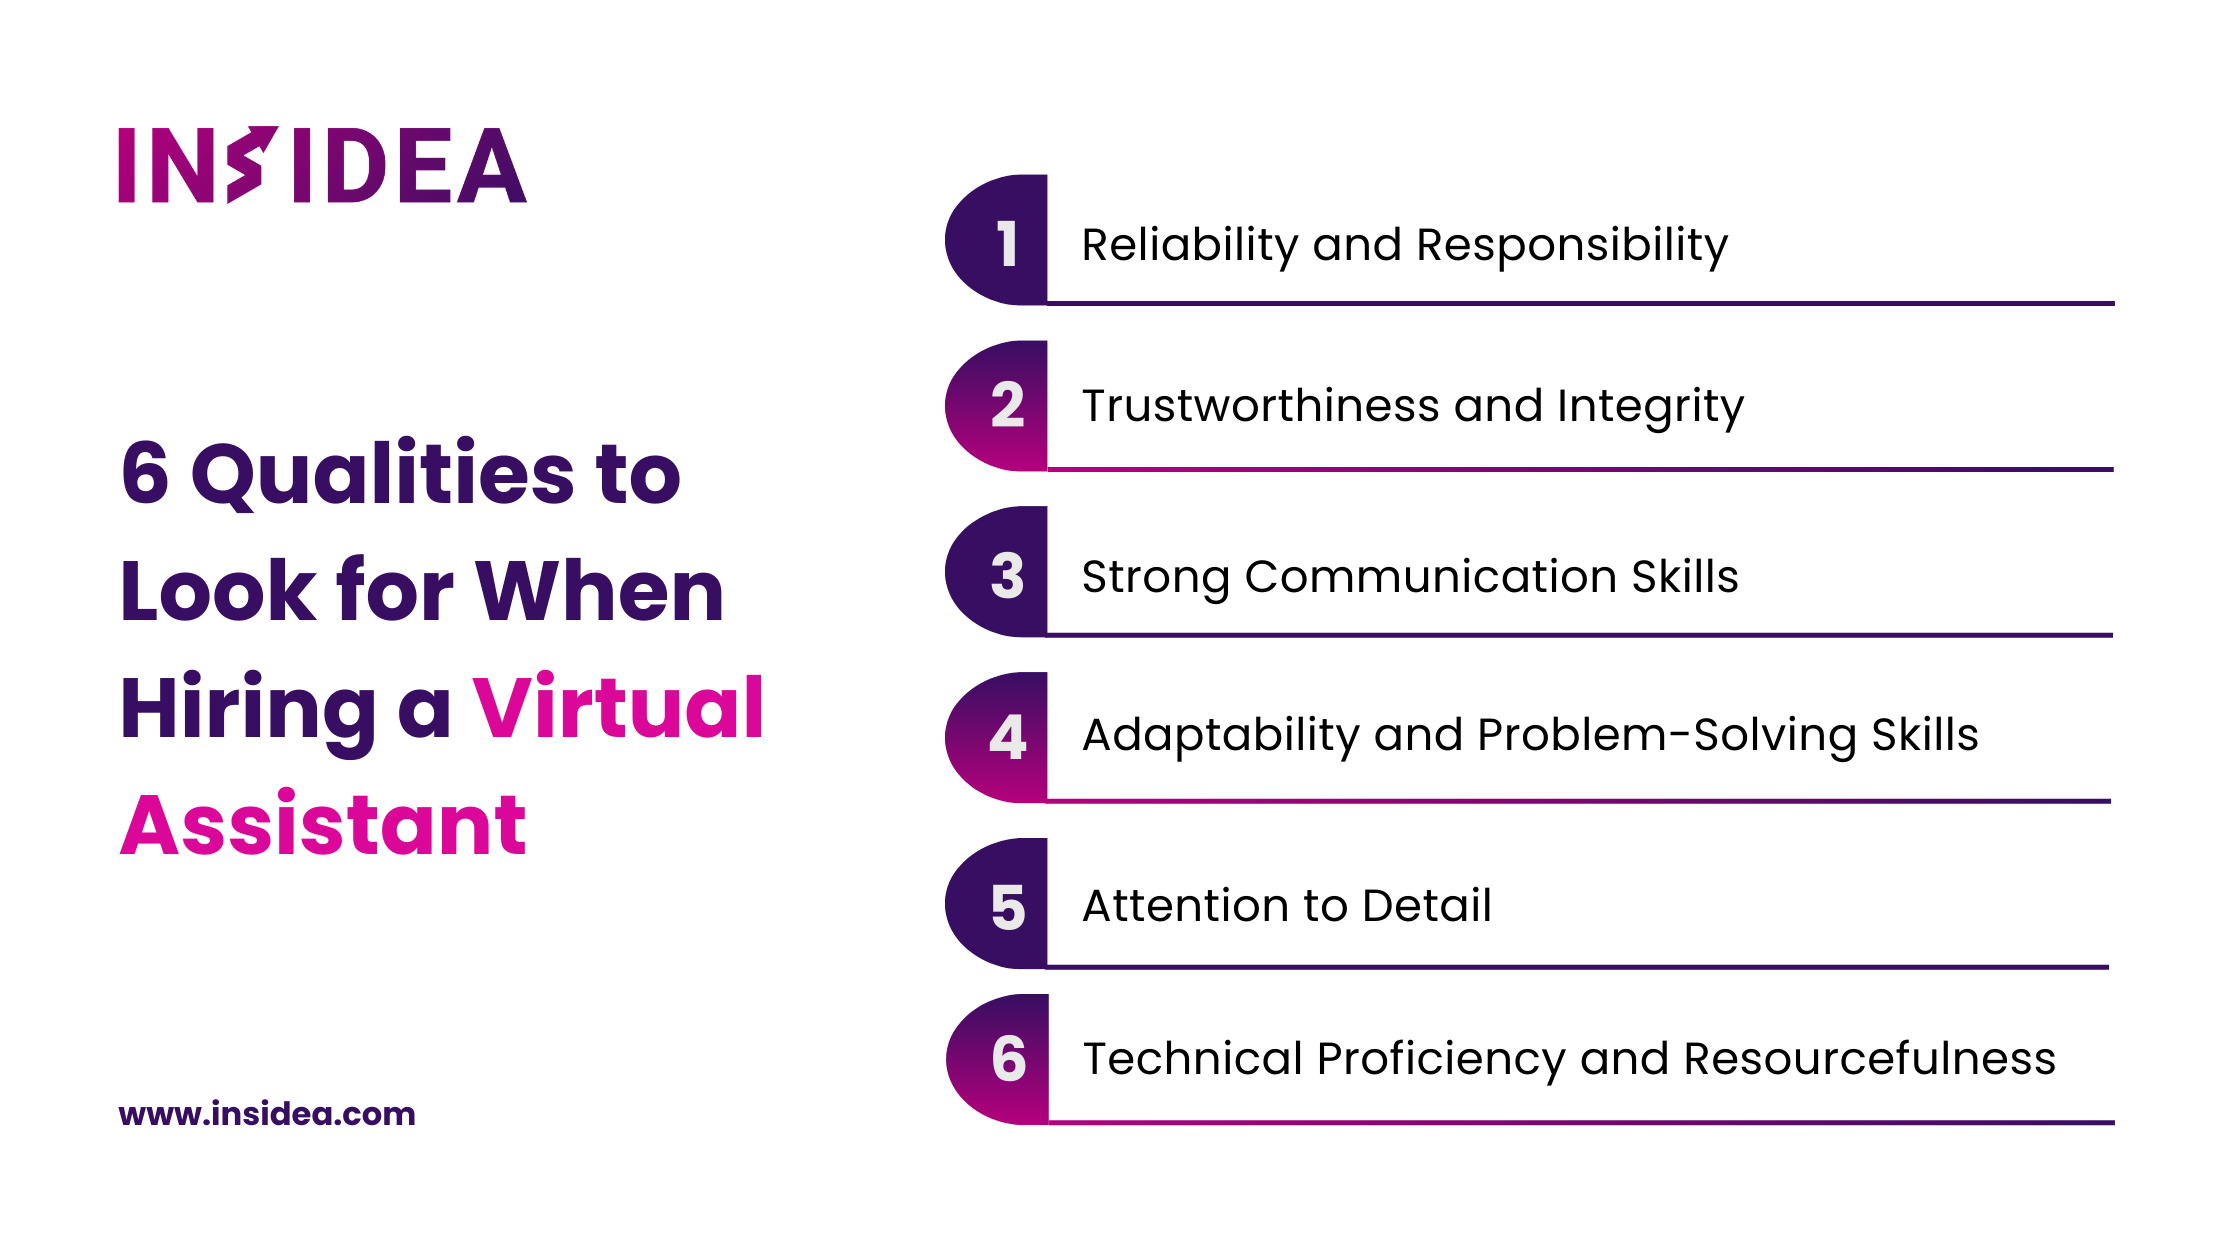 6 Qualities to Look for When Hiring a Virtual Assistant